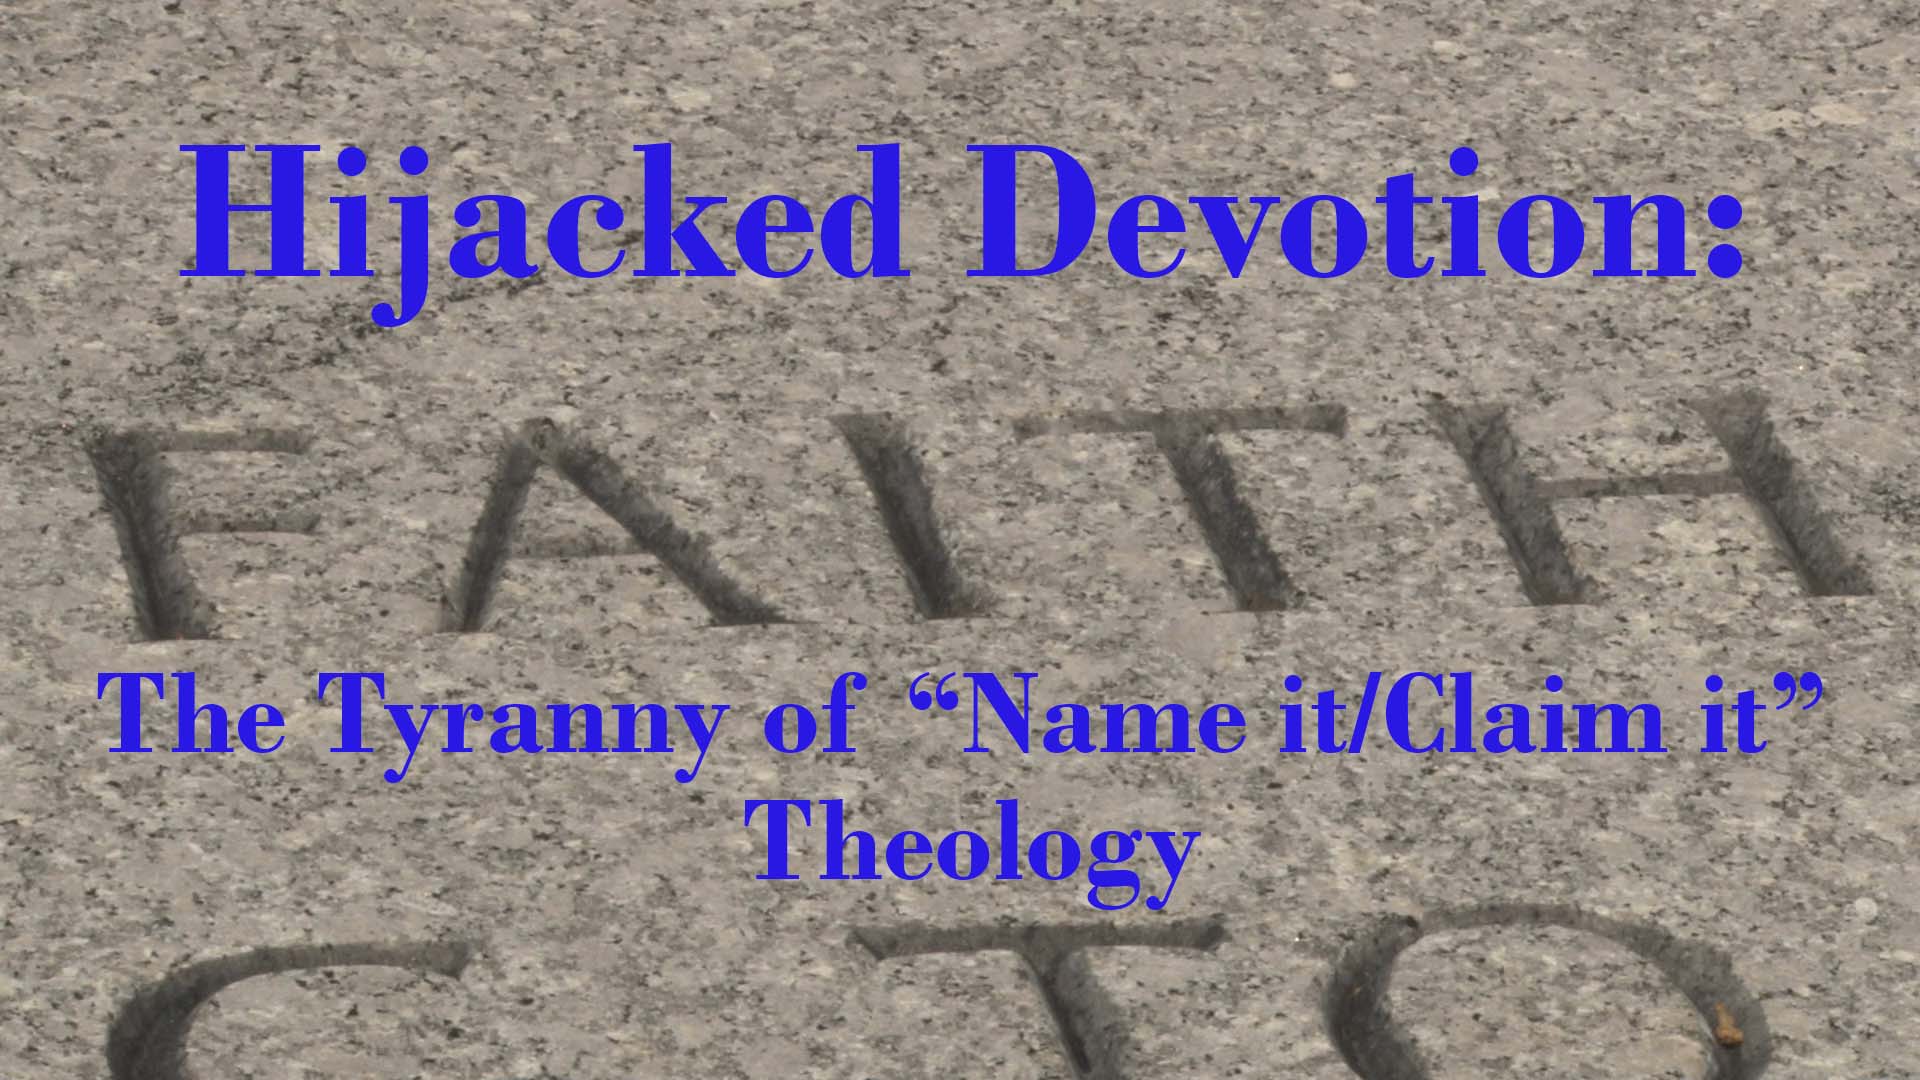 Hijacked Devotion: The Tyranny of Name it/Claim it Theology